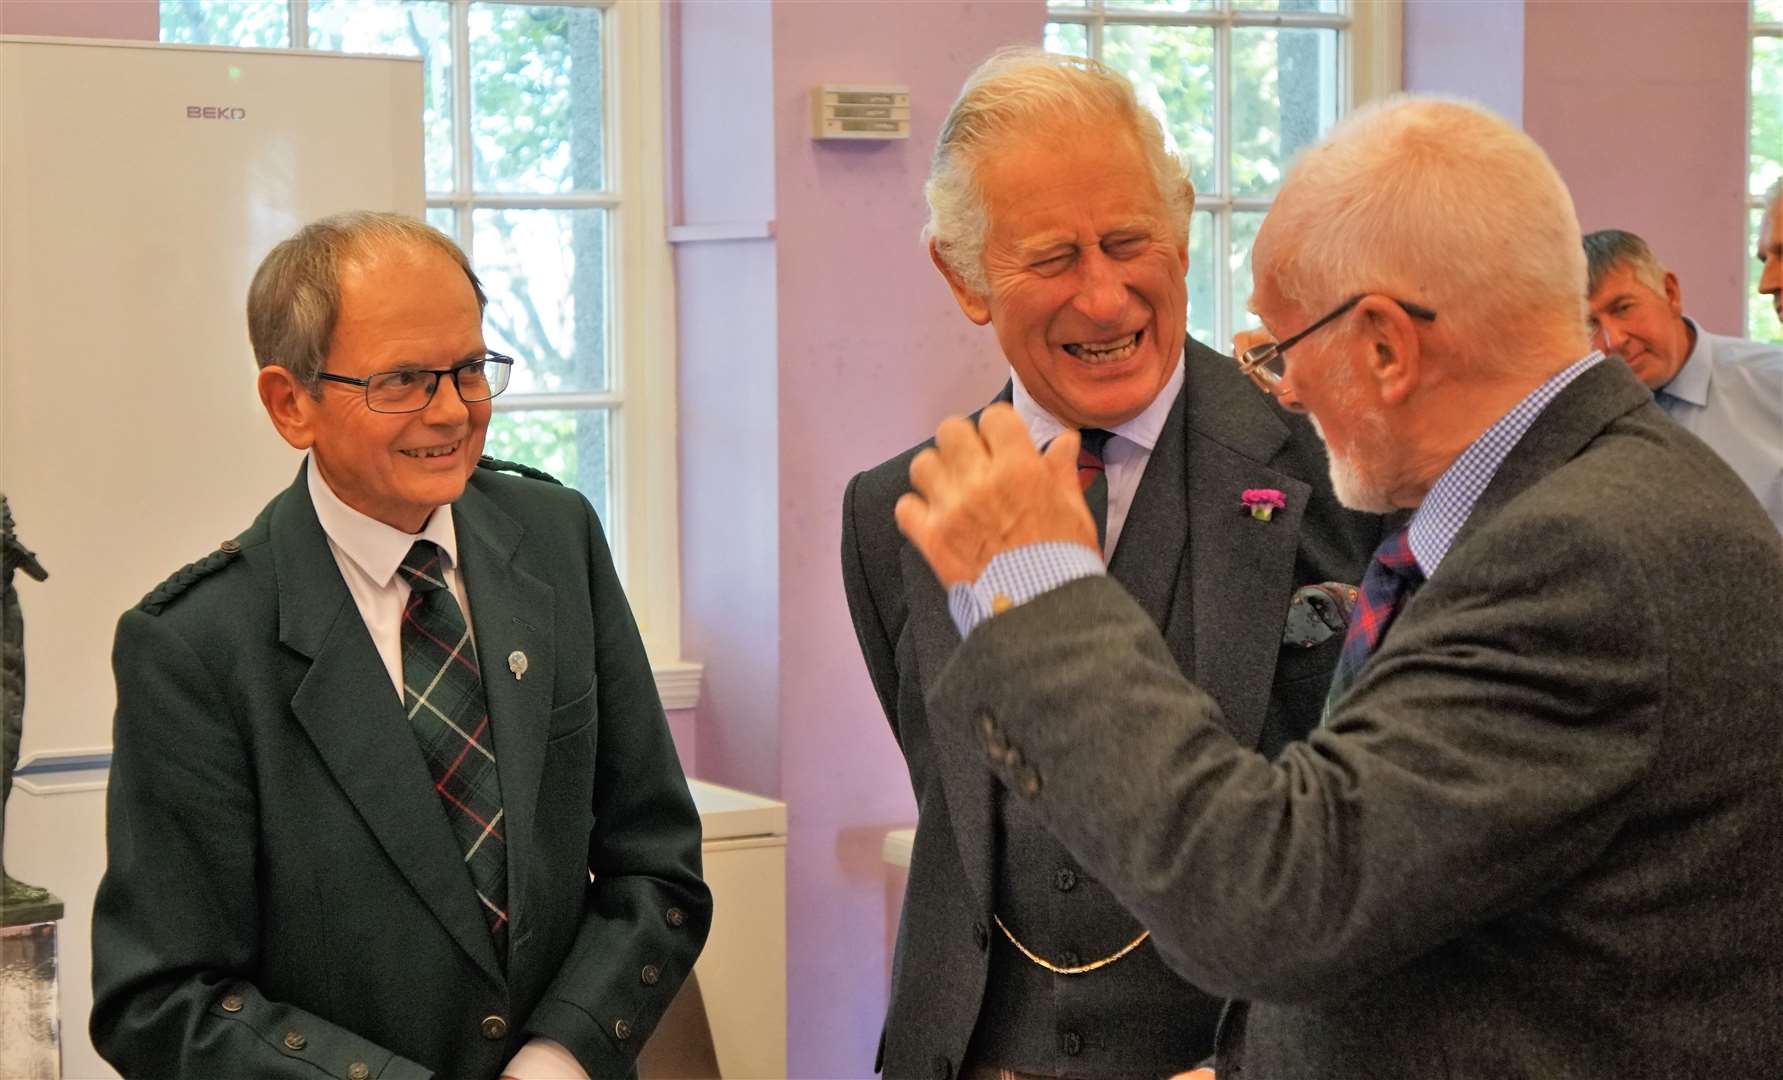 HRH showed his jovial nature as he speaks to Edward Atkins, a retired fisherman and committee member on the Seafarers Memorial Group. John Bogle, from the group, is at left. Picture: DGS